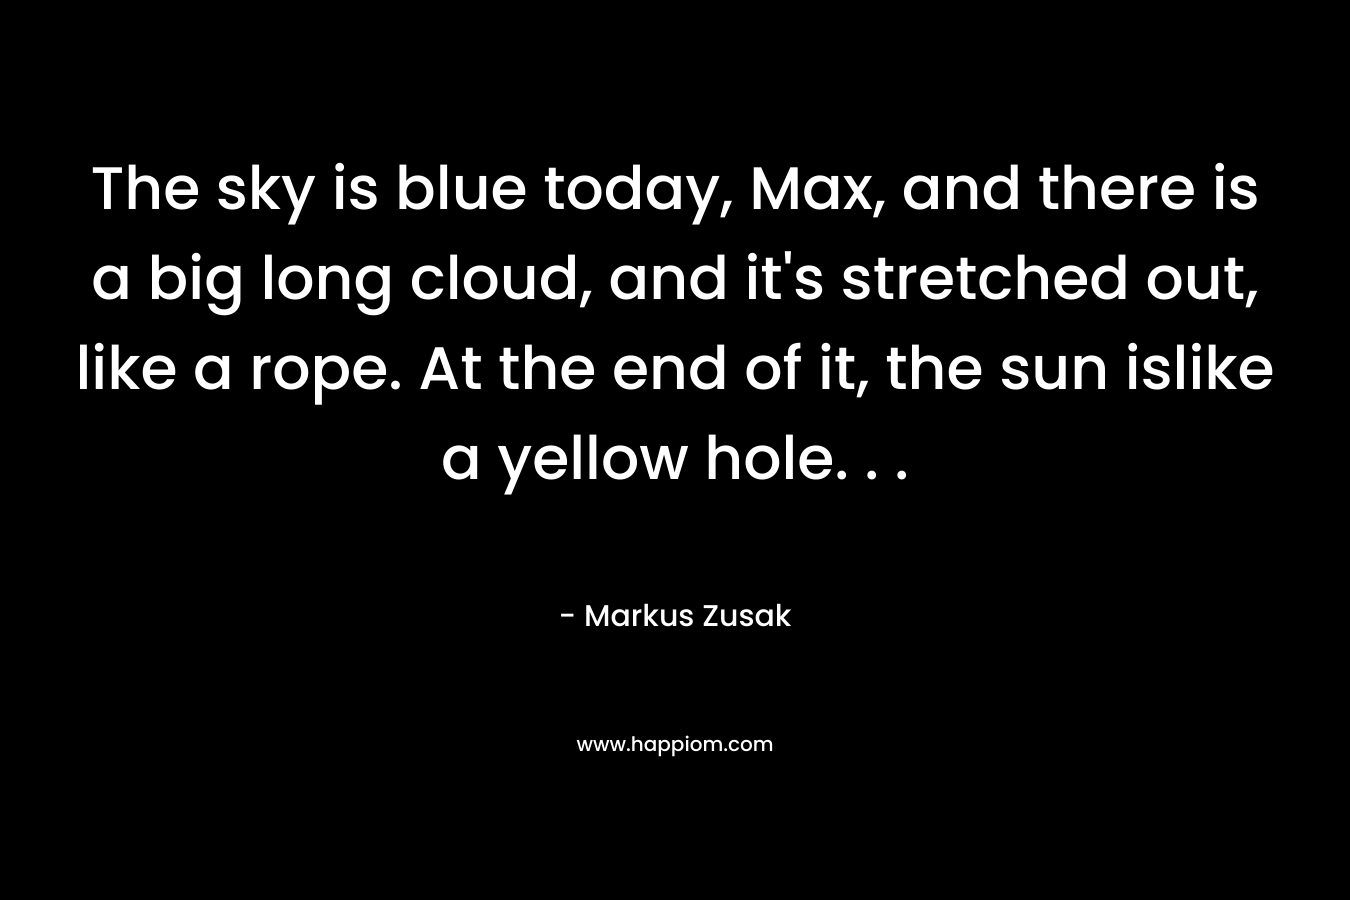 The sky is blue today, Max, and there is a big long cloud, and it’s stretched out, like a rope. At the end of it, the sun islike a yellow hole. . . – Markus Zusak